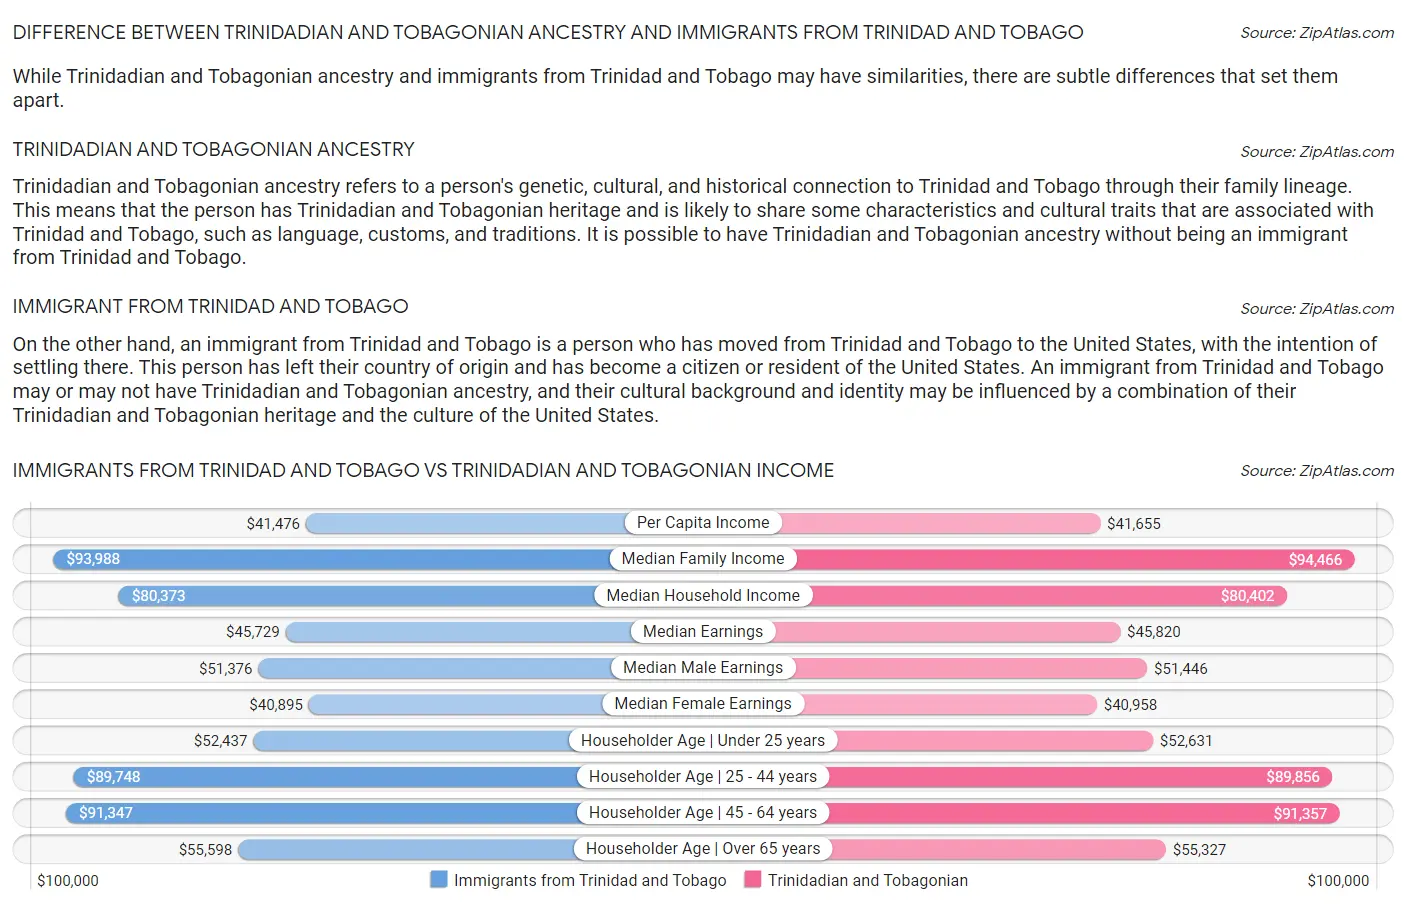 Immigrants from Trinidad and Tobago vs Trinidadian and Tobagonian Income